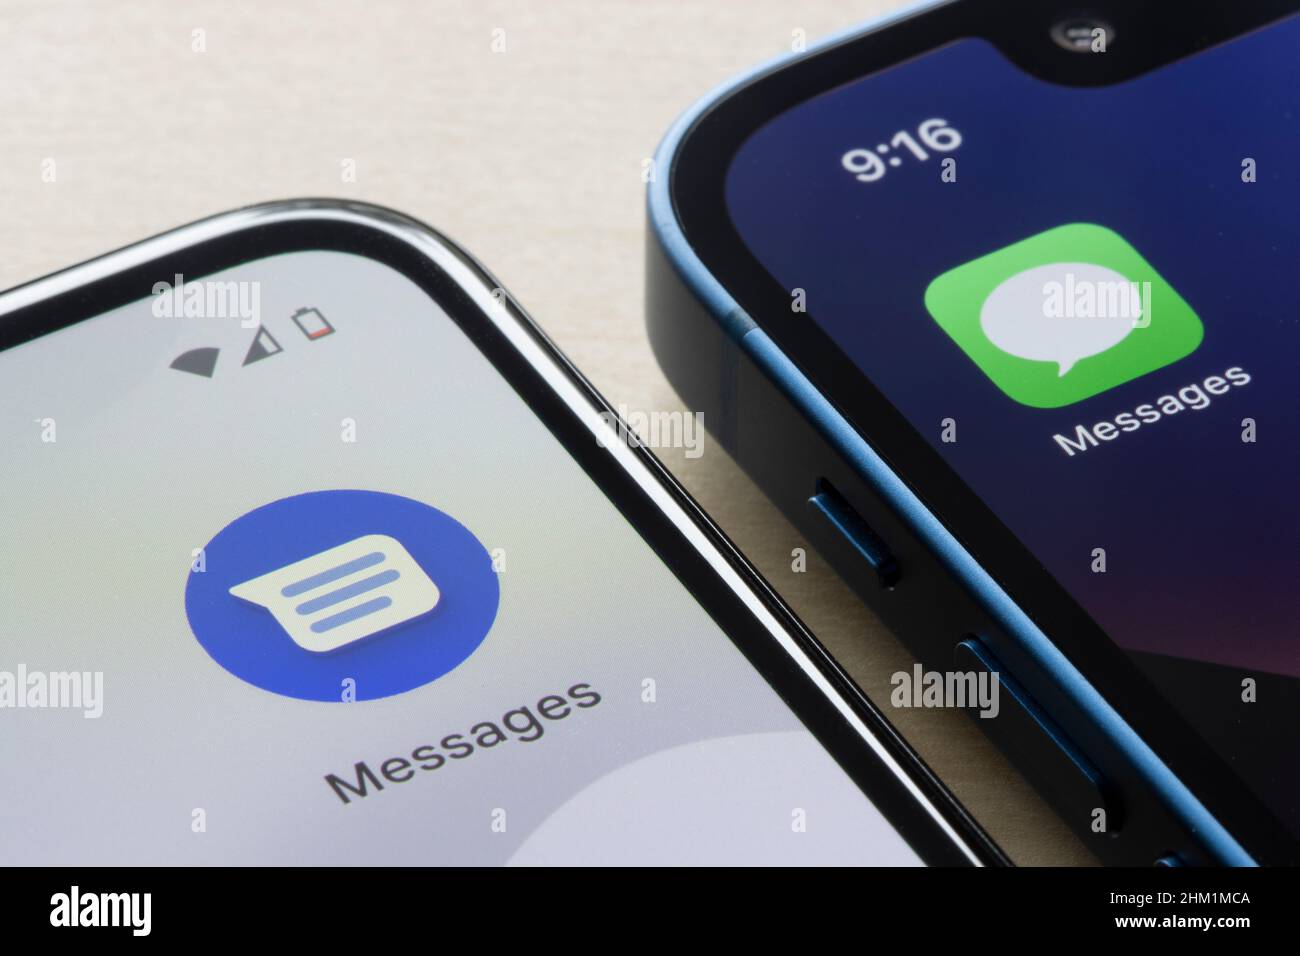 Google Messages and Apple's iMessage app icons are seen respectively on a Google Pixel 4a smartphone and an iPhone 13 mini. Android vs iOS concept. Stock Photo